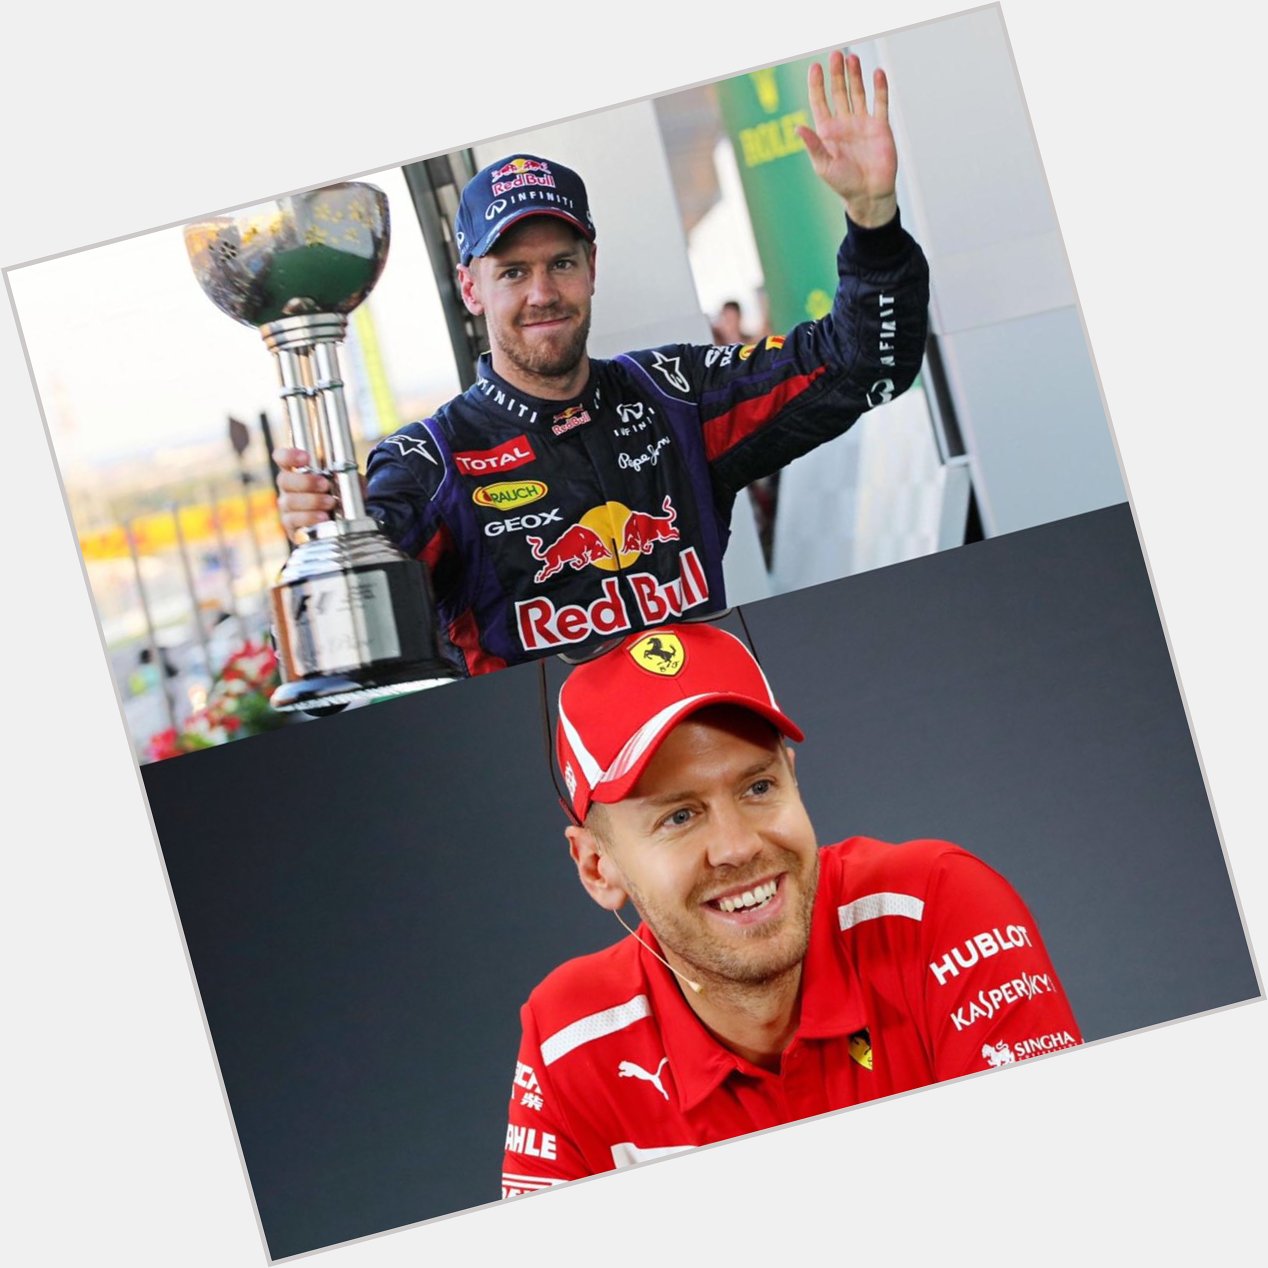 Happy birthday to our 4 times world champion Sebastian Vettel, who is 33 years young today 